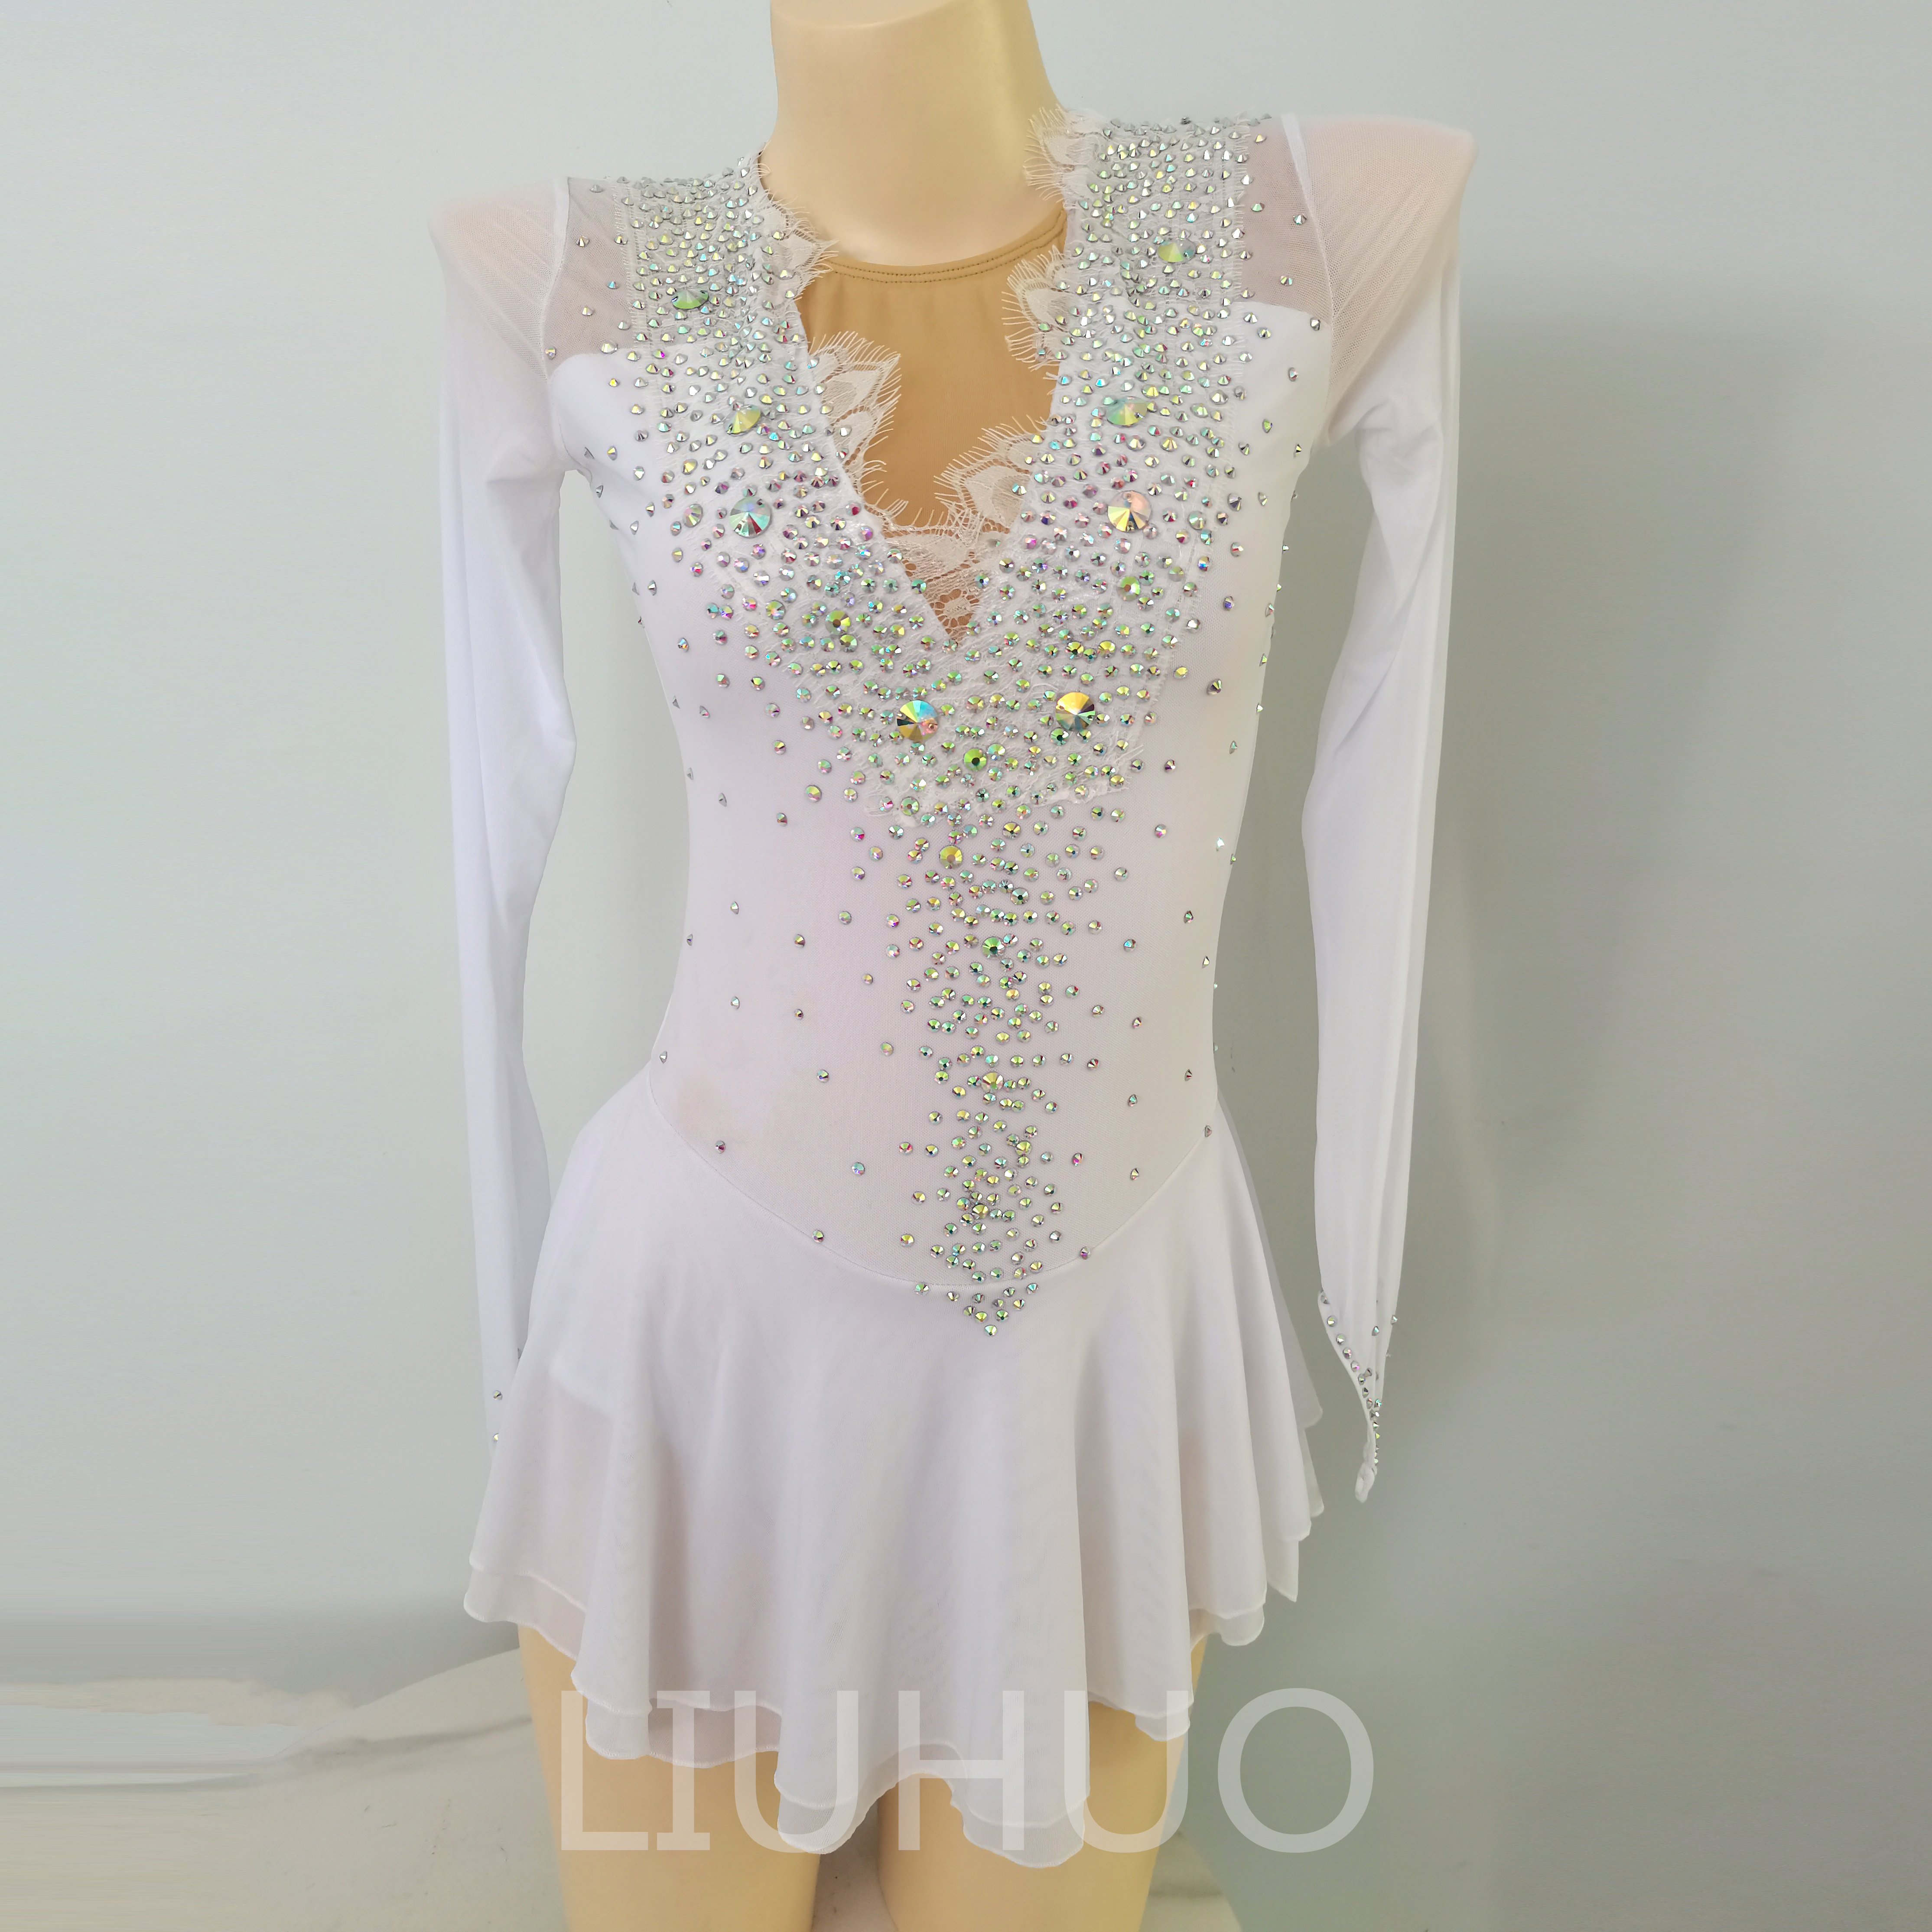 LIUHUO Ice Skating Dress for Competition Gradient Girls Crystals White